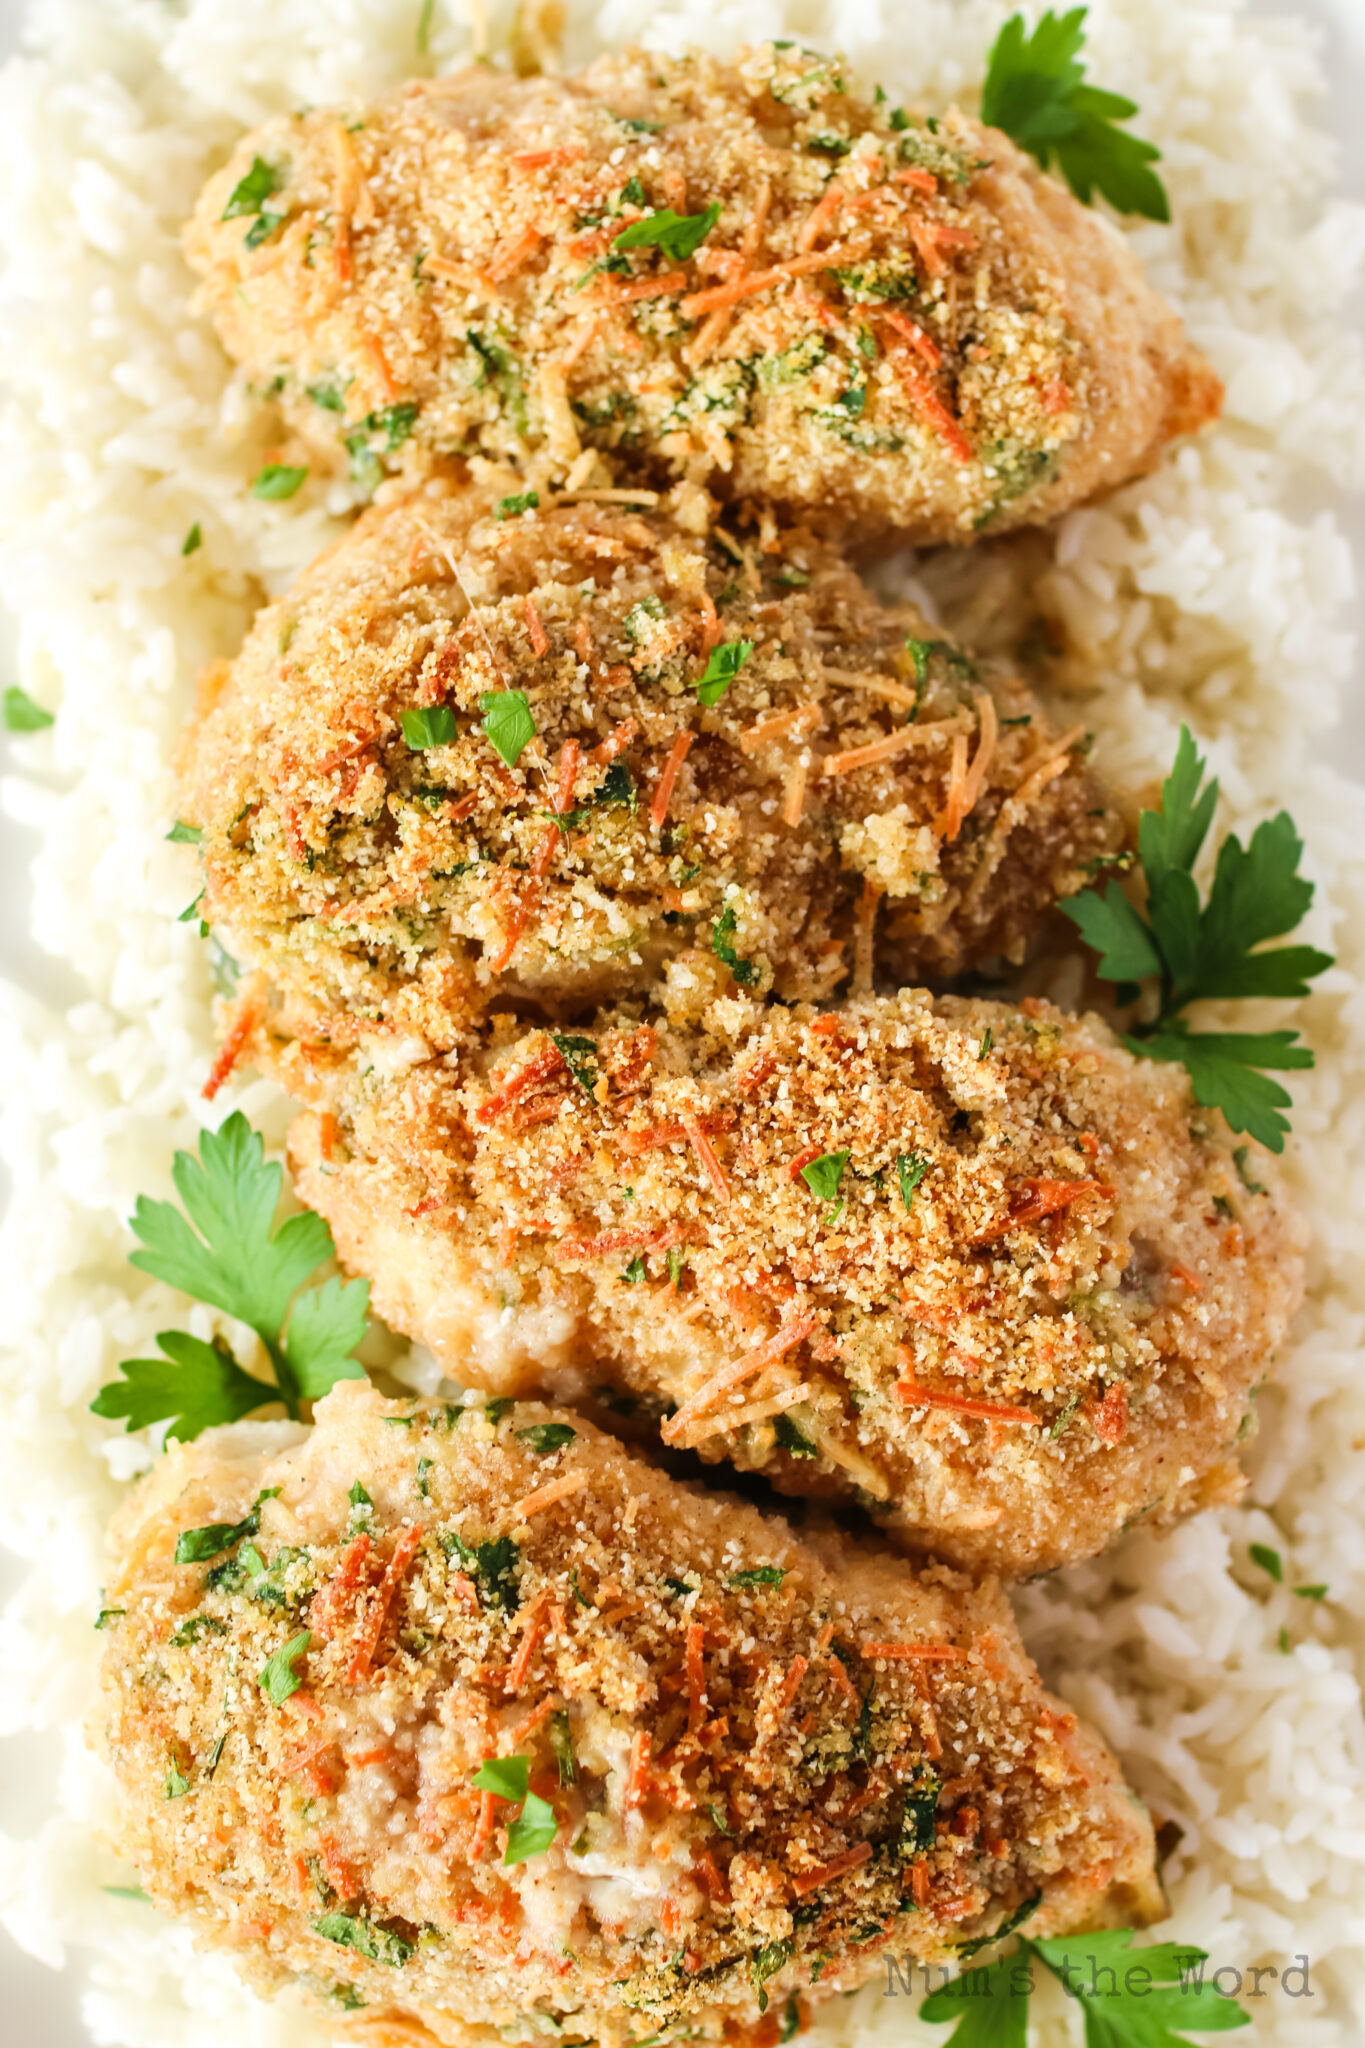 Imperial Chicken Recipe - Num's the Word